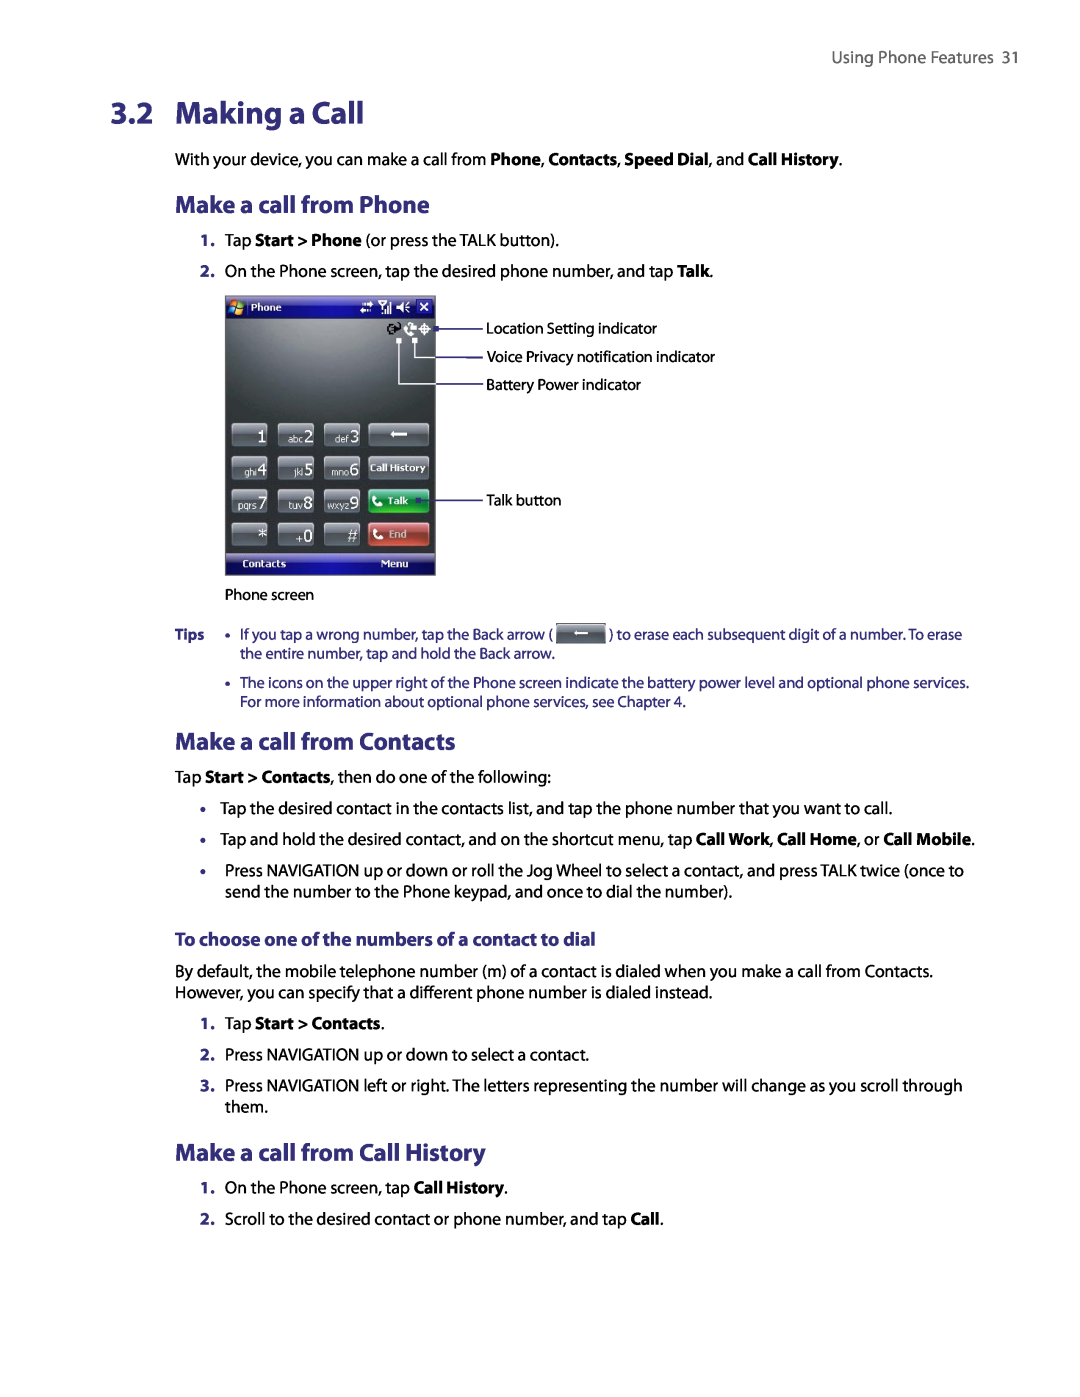 HTC PDA Phone user manual Making a Call, Make a call from Phone, Make a call from Contacts, Make a call from Call History 